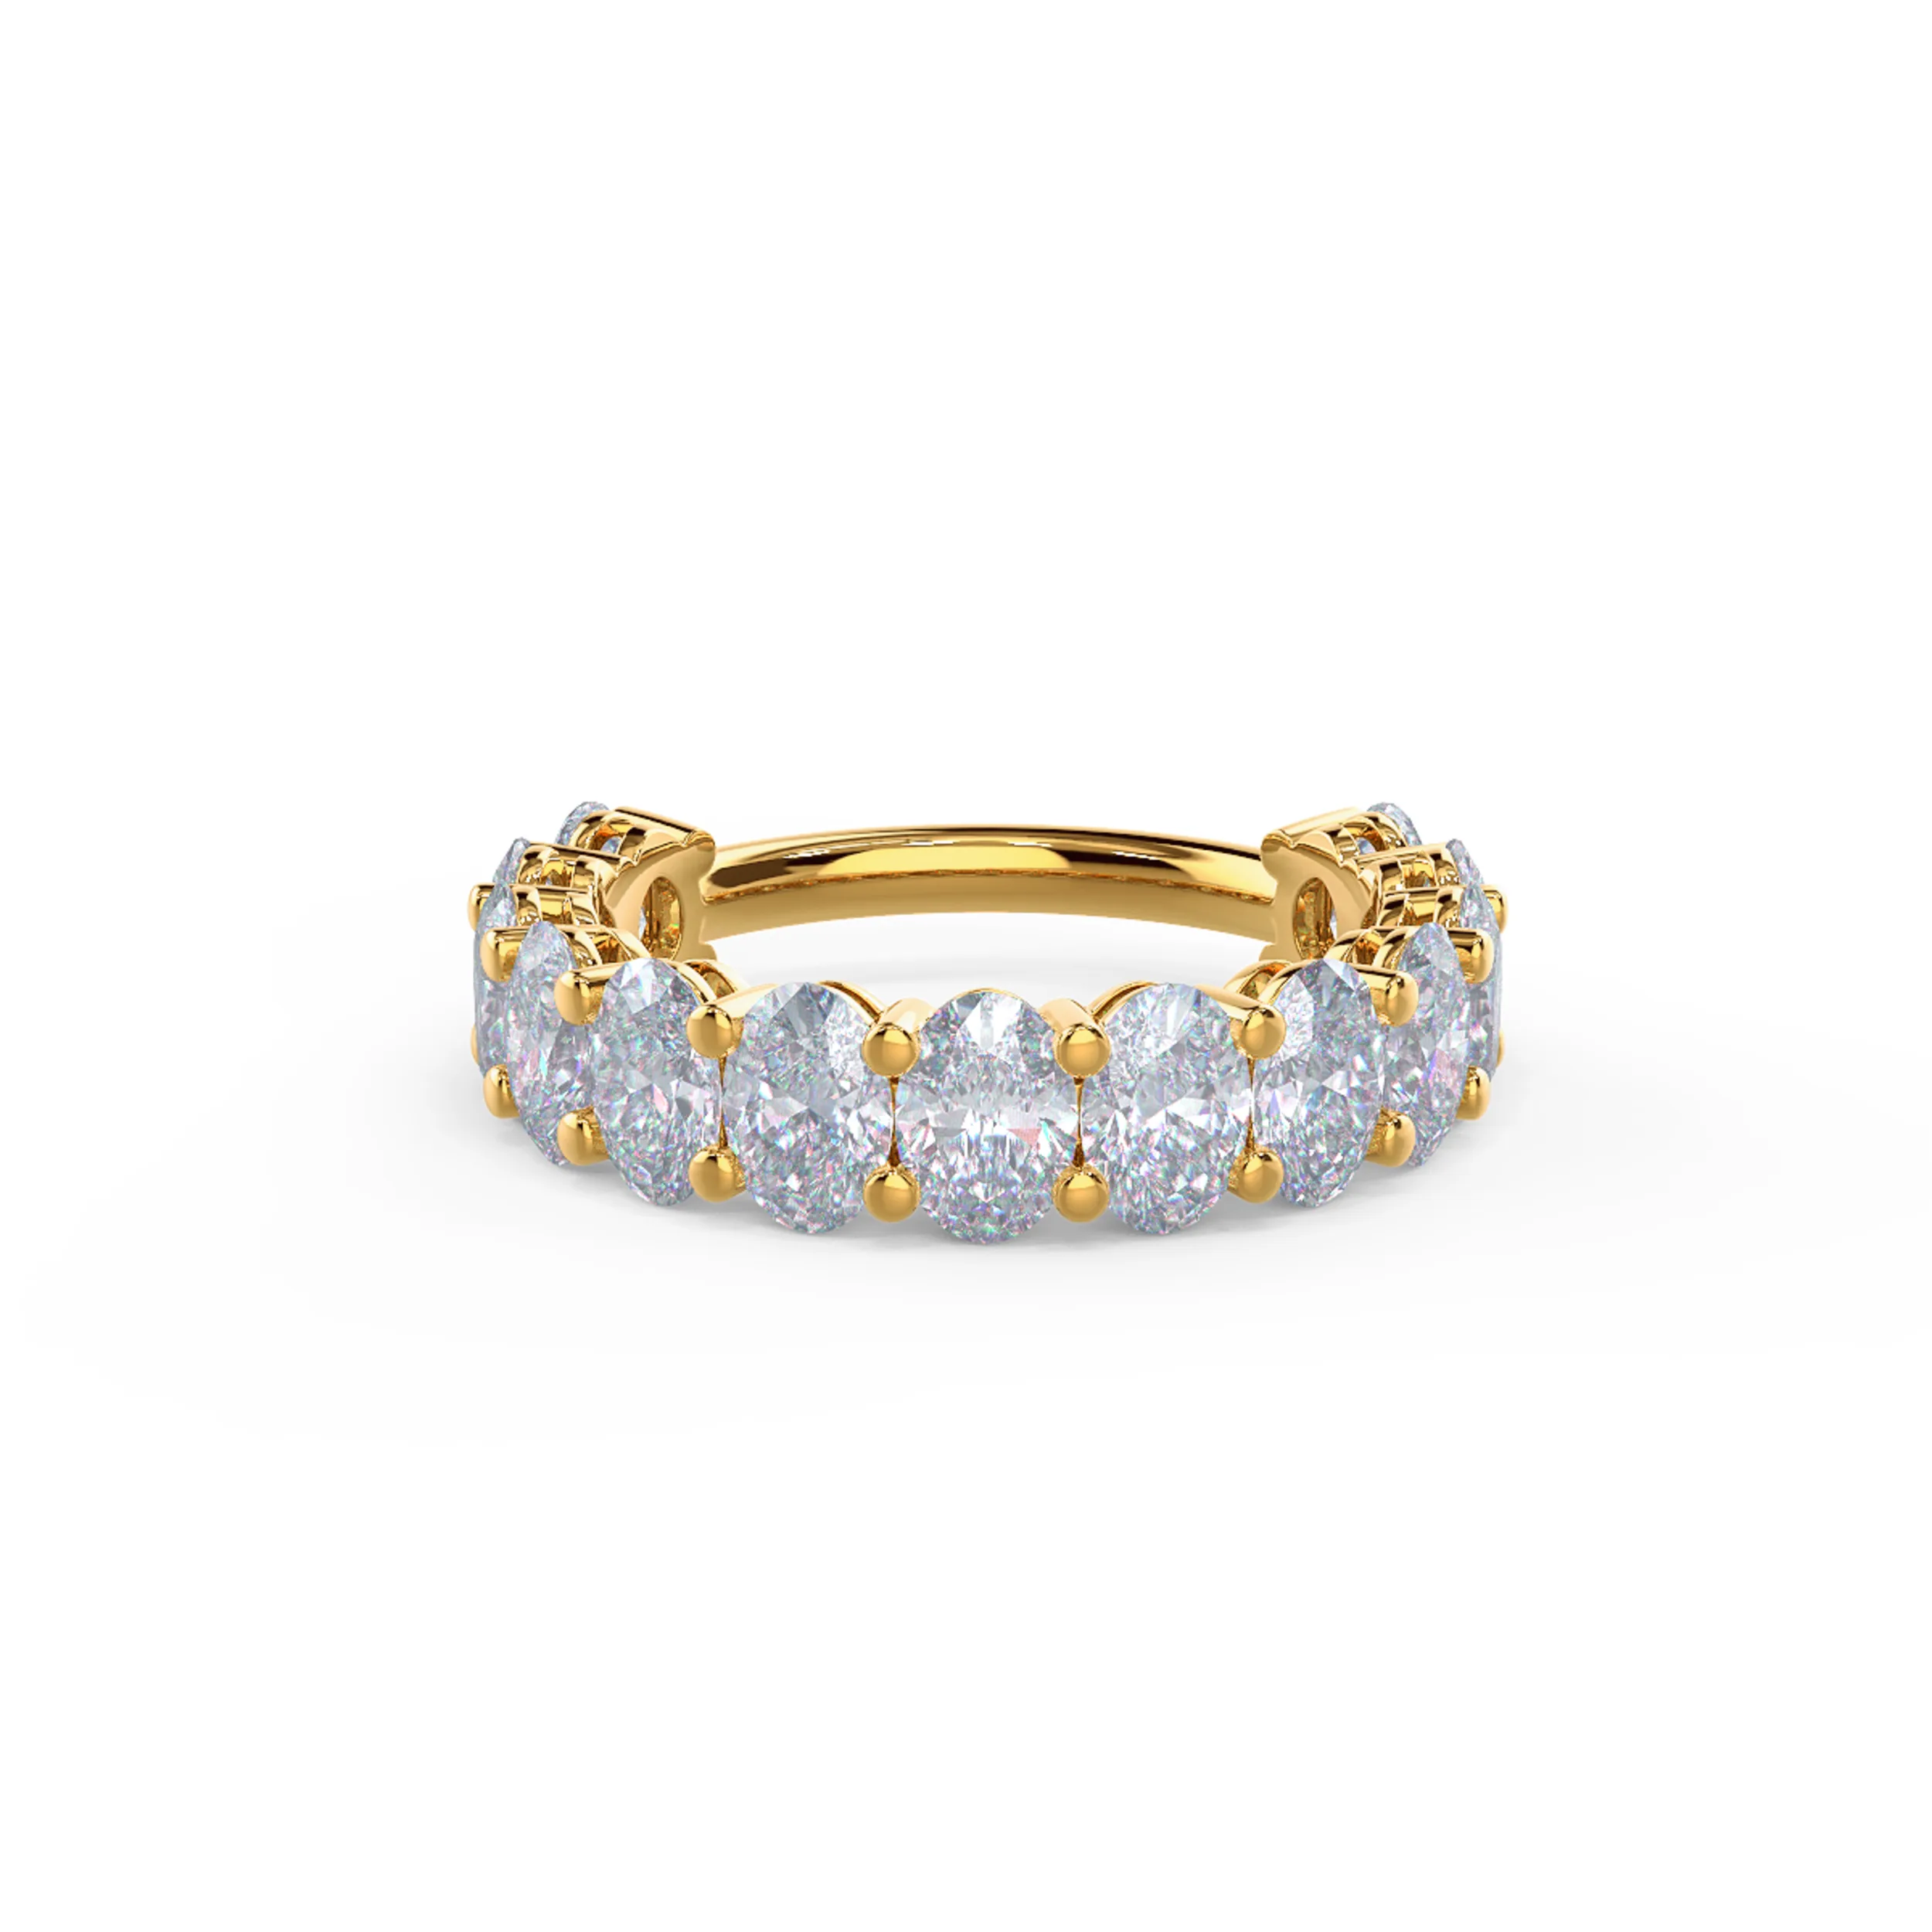 14k Yellow Gold Oval Basket Three Quarter Band featuring Exceptional Quality 4.0 ctw Lab Diamonds (Main View)